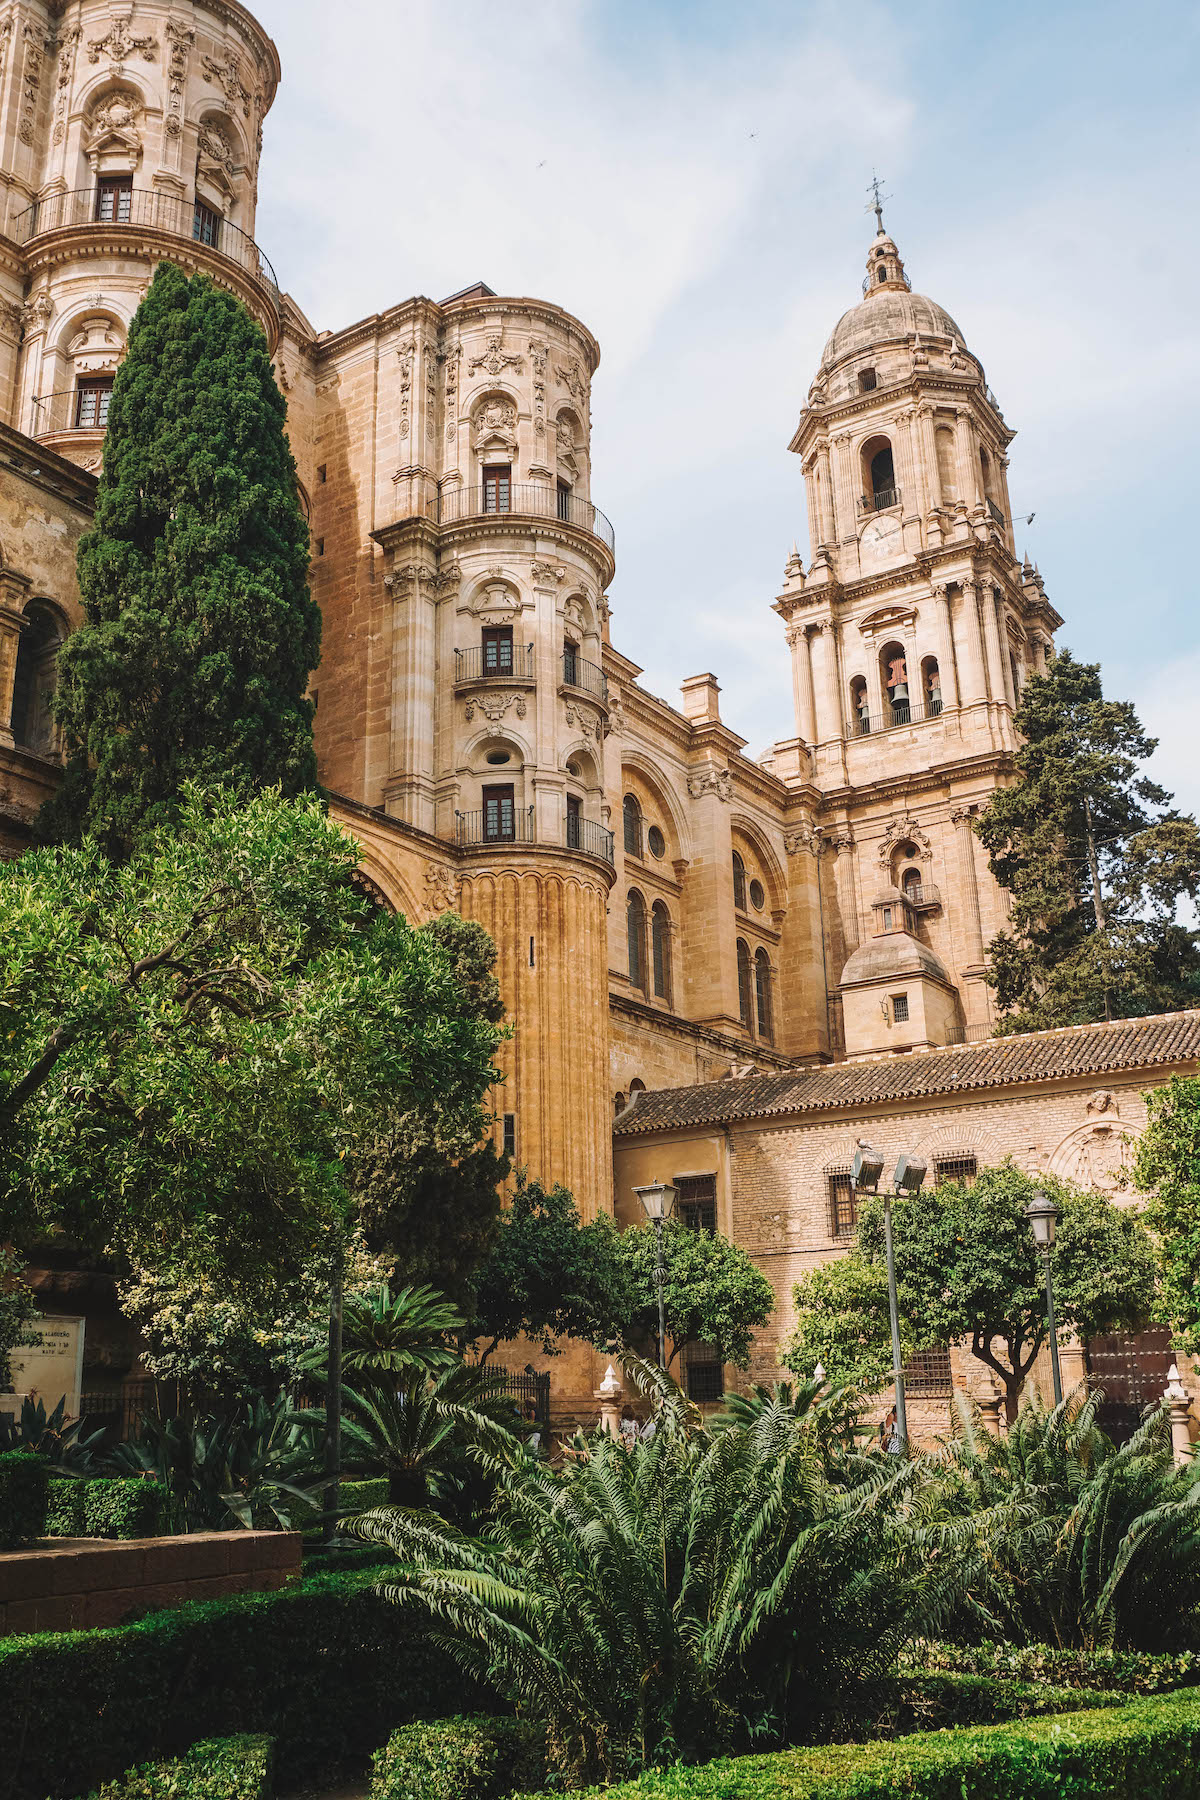 The bell tower of La Manquita of Malaga, seen from the gardens.